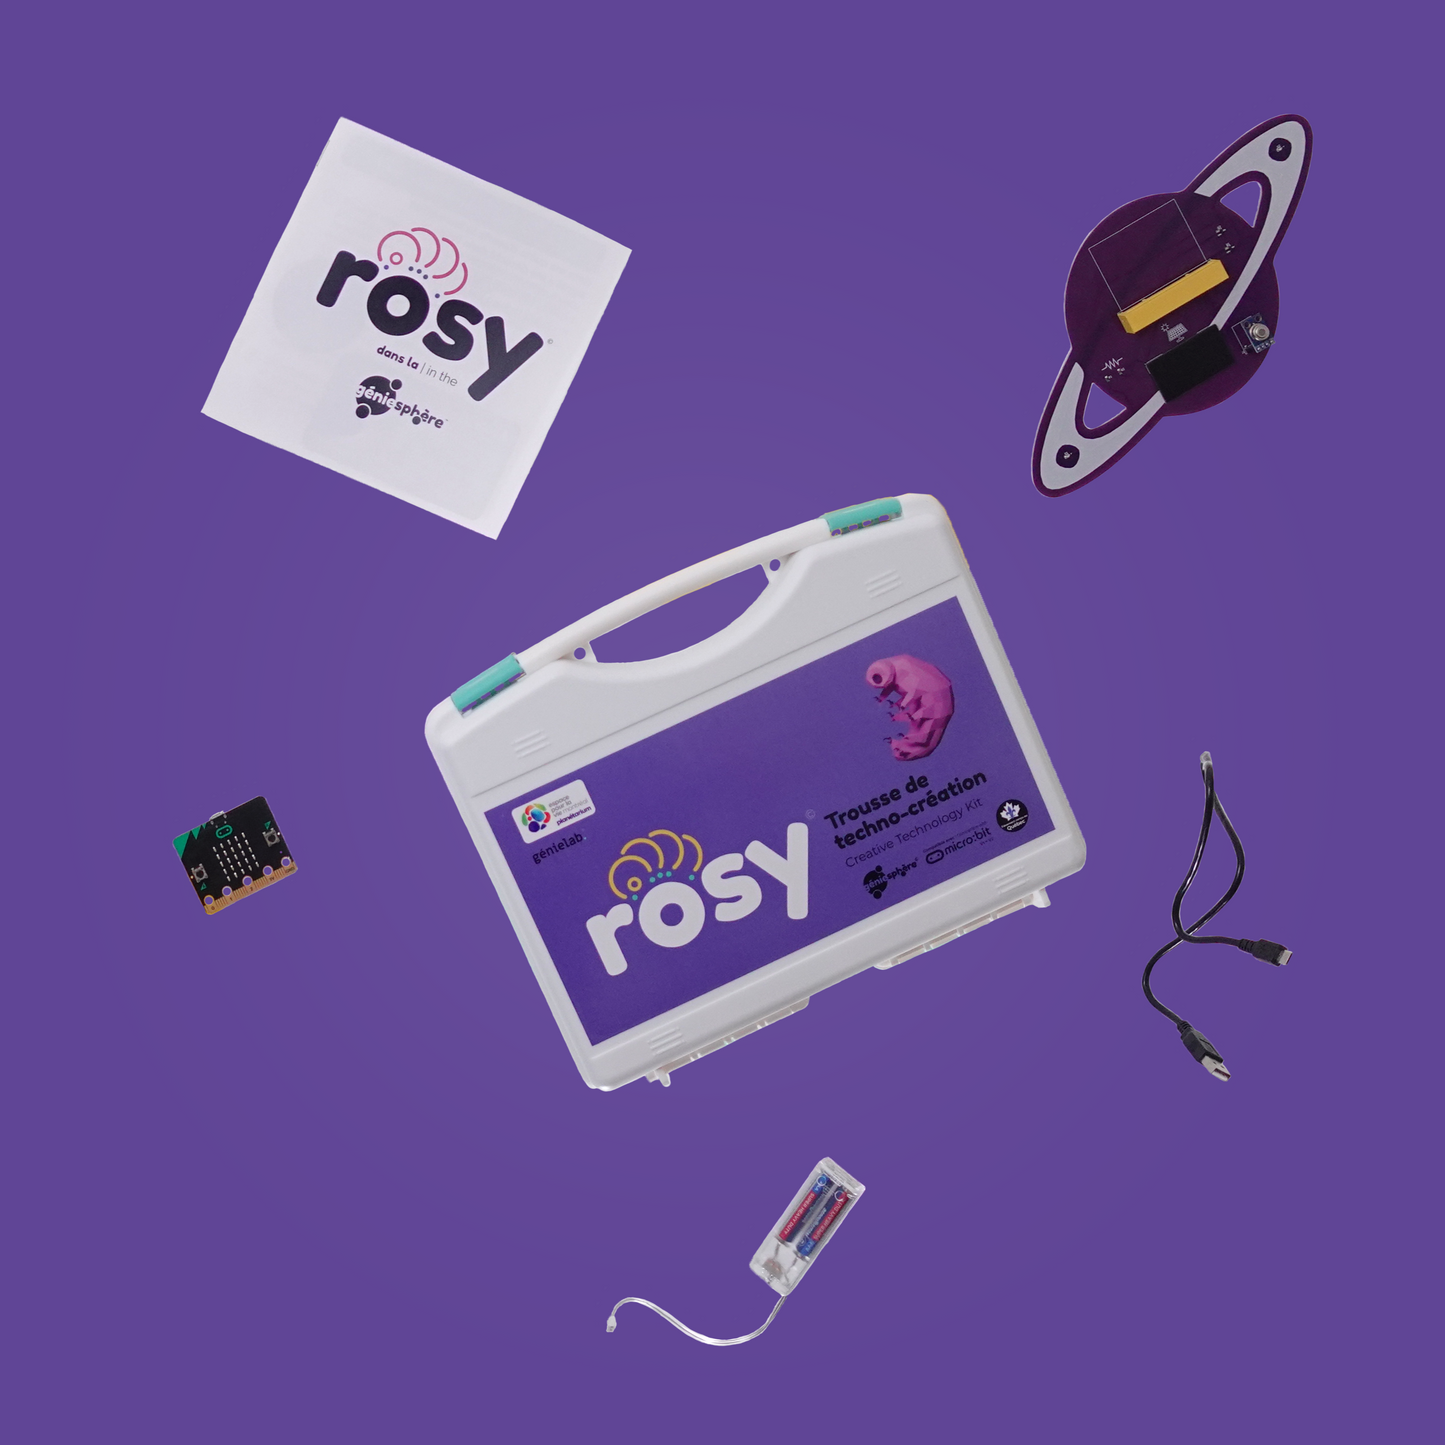 Rosy training course